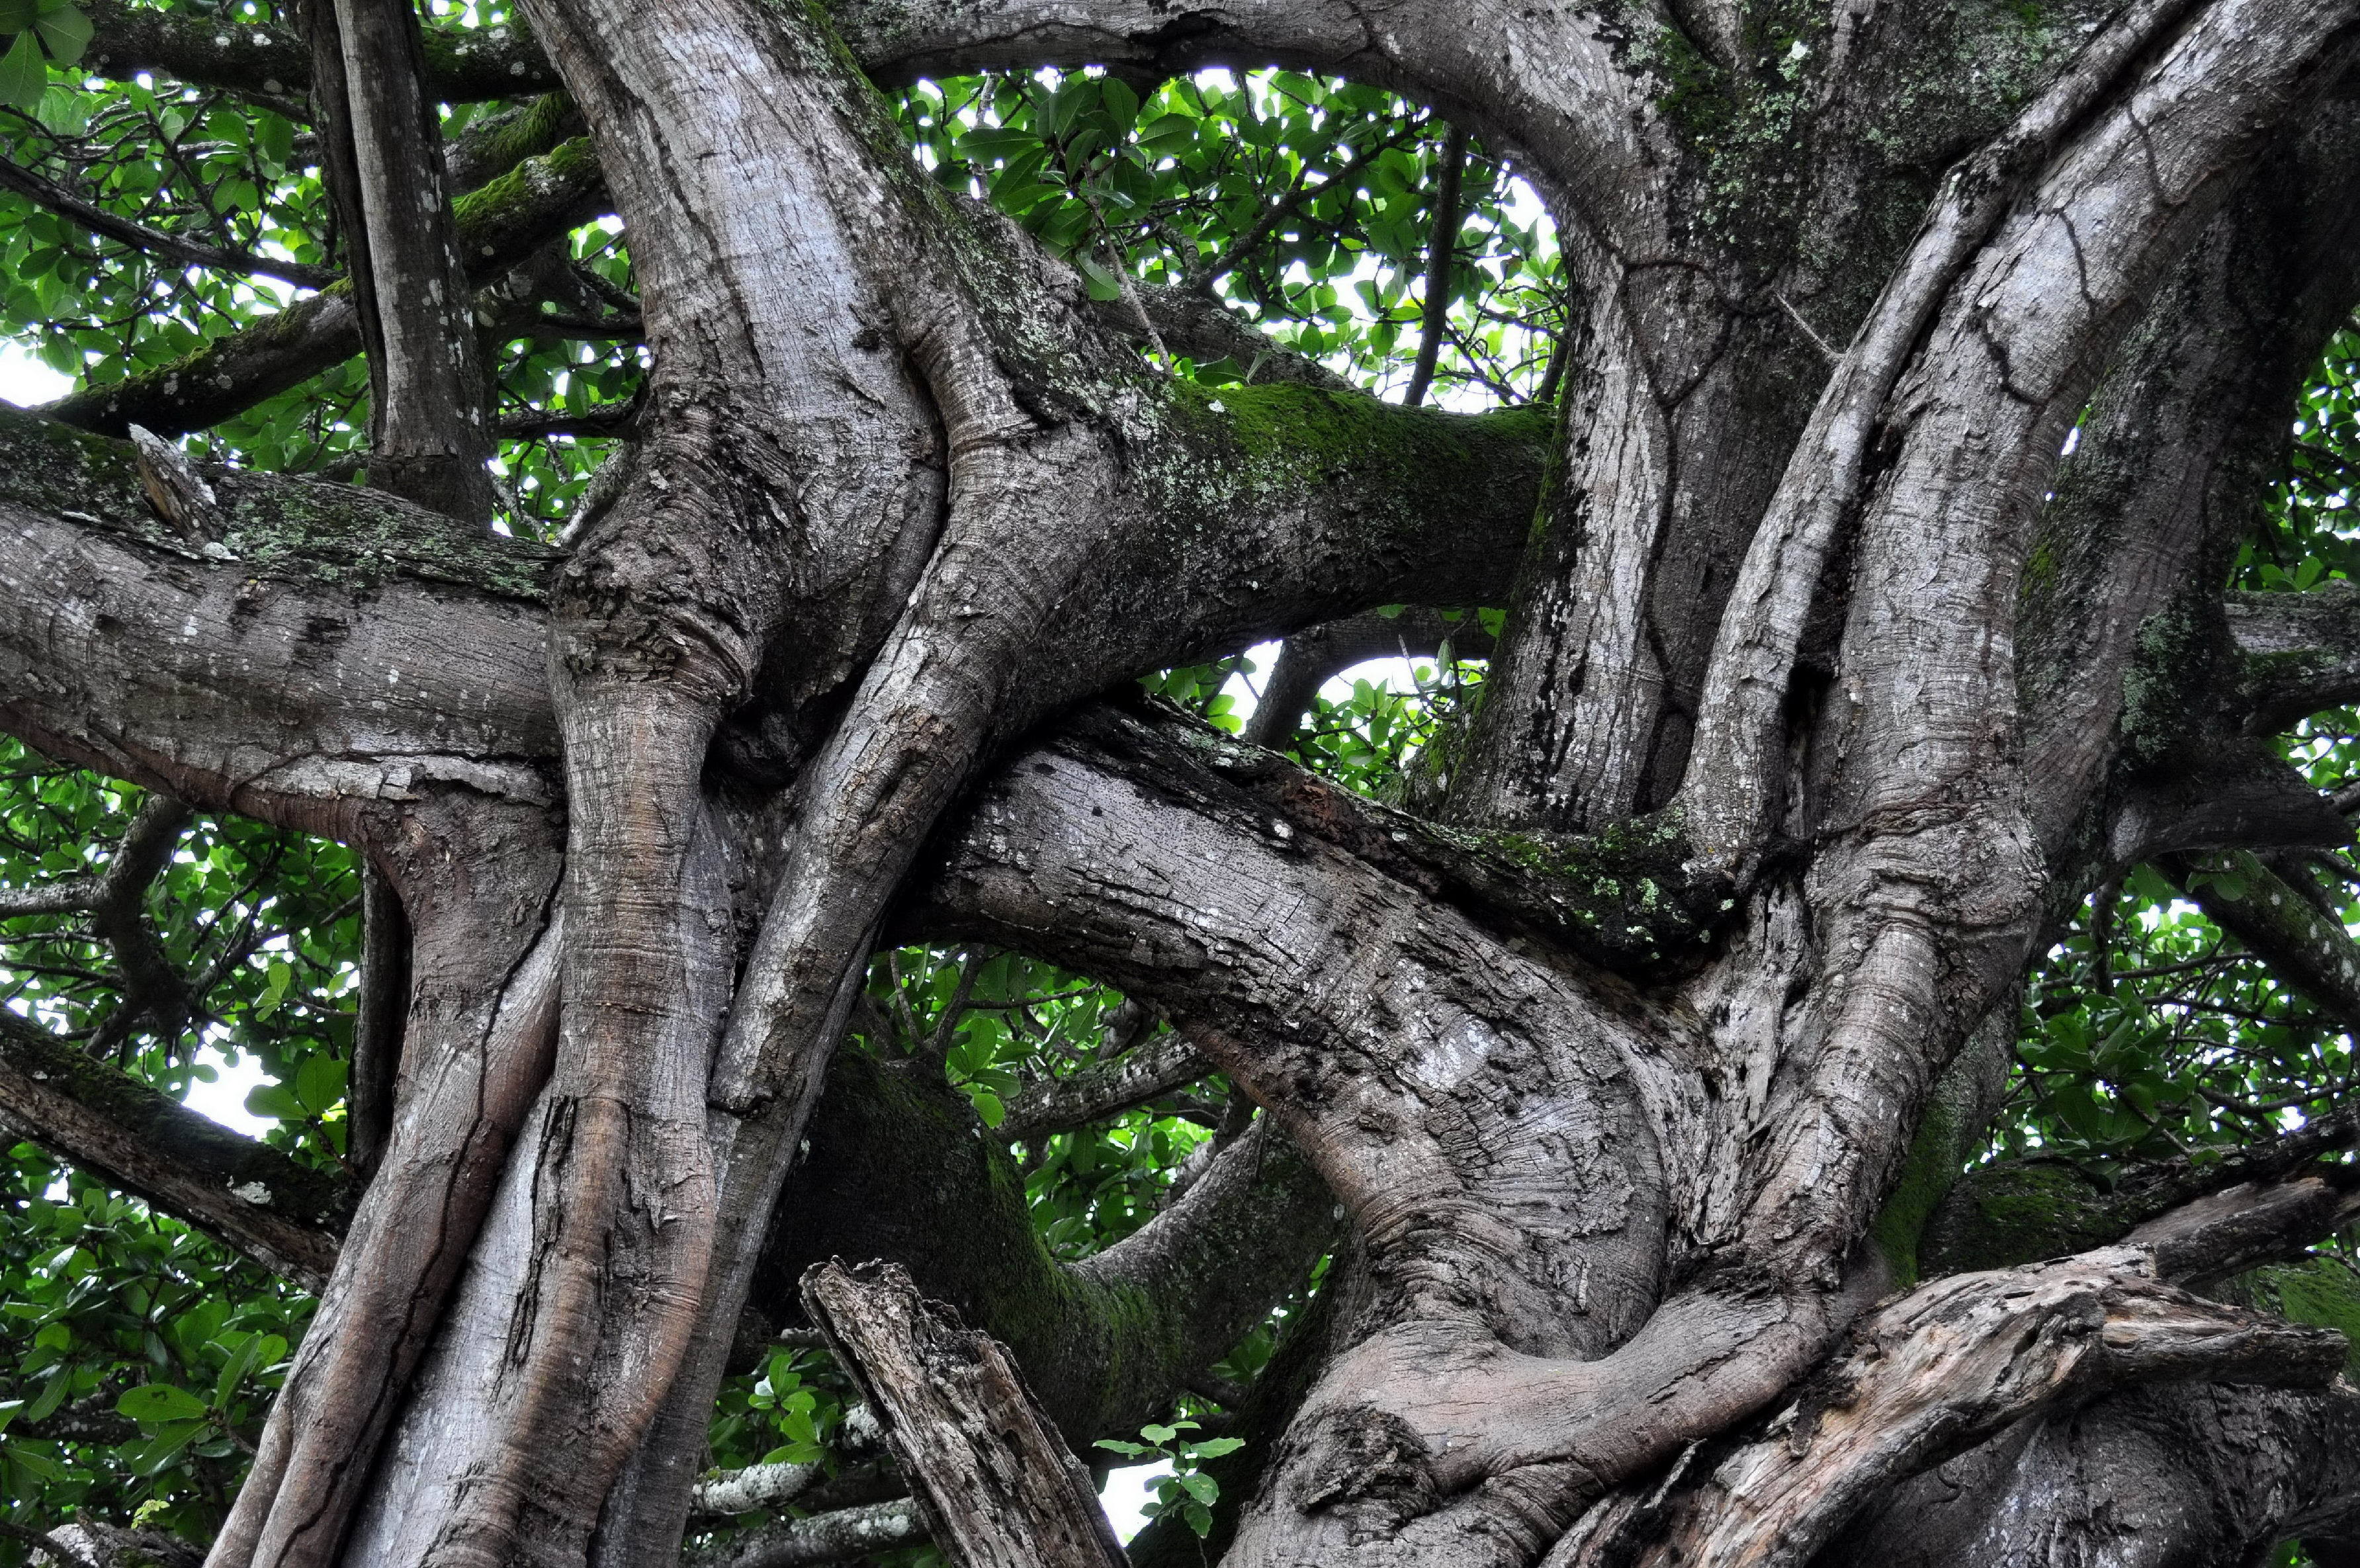 Intertwined branches of a large tree - used as conference image